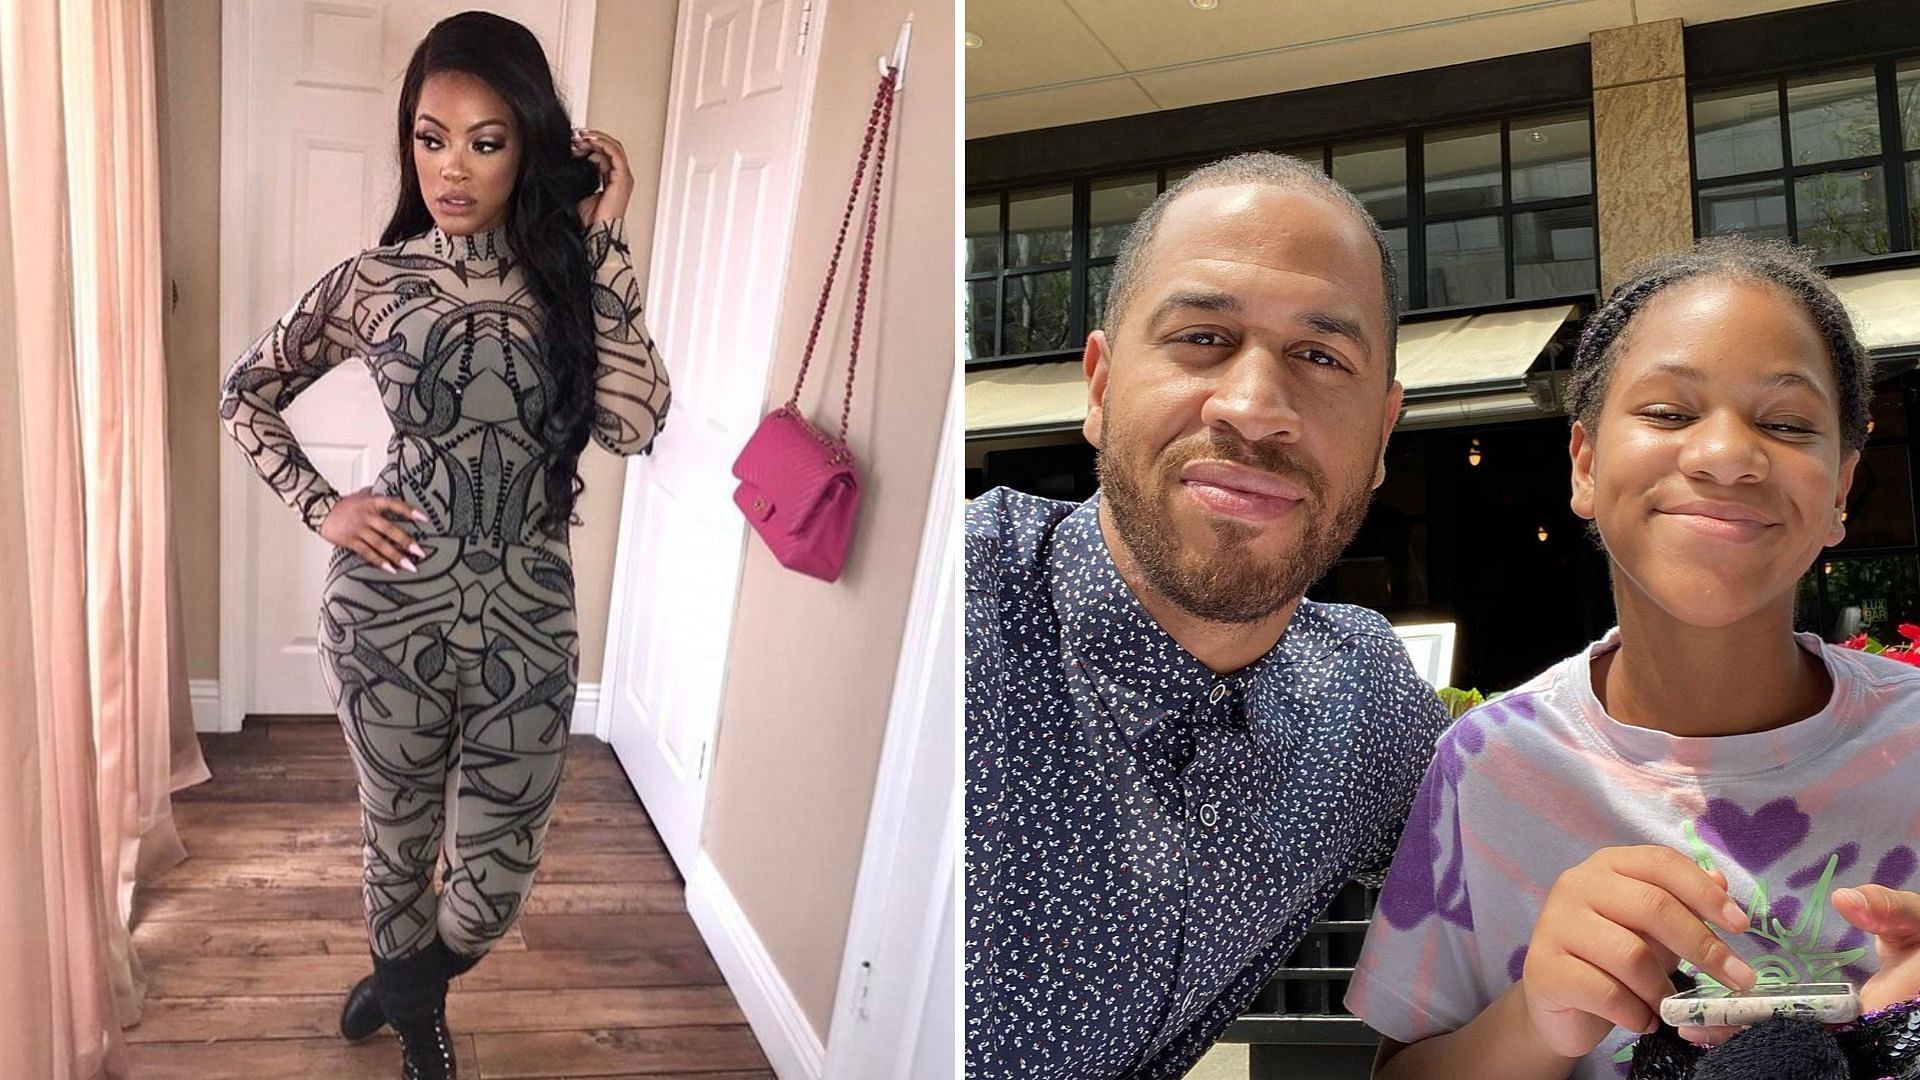 Why did Malaysia Pargo divorce Jannero Pargo? Here's why 'Basketball Wives'  star demanded his NBA pension